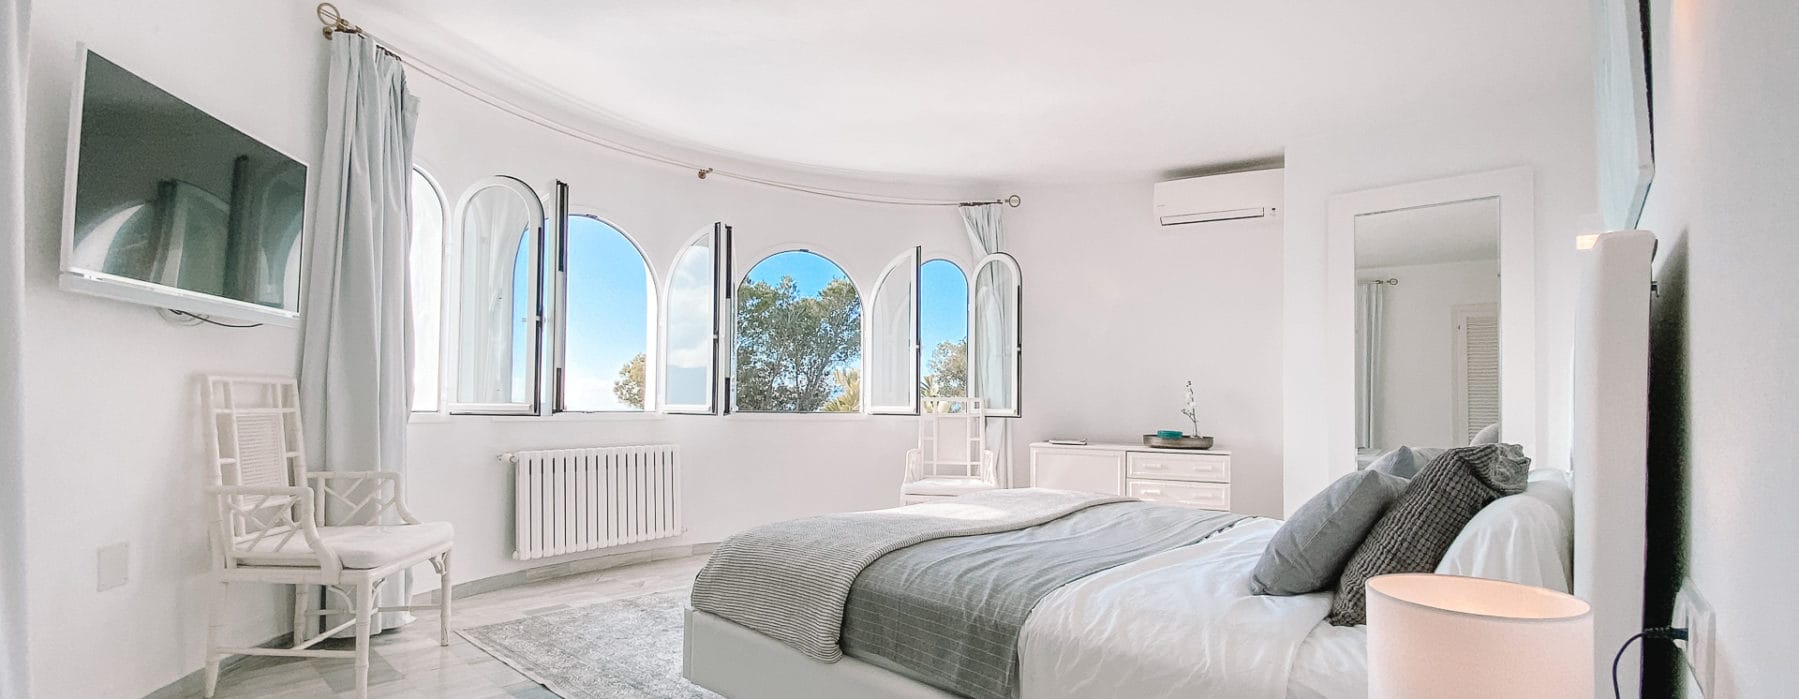 Double bedroom with round window wall in white design